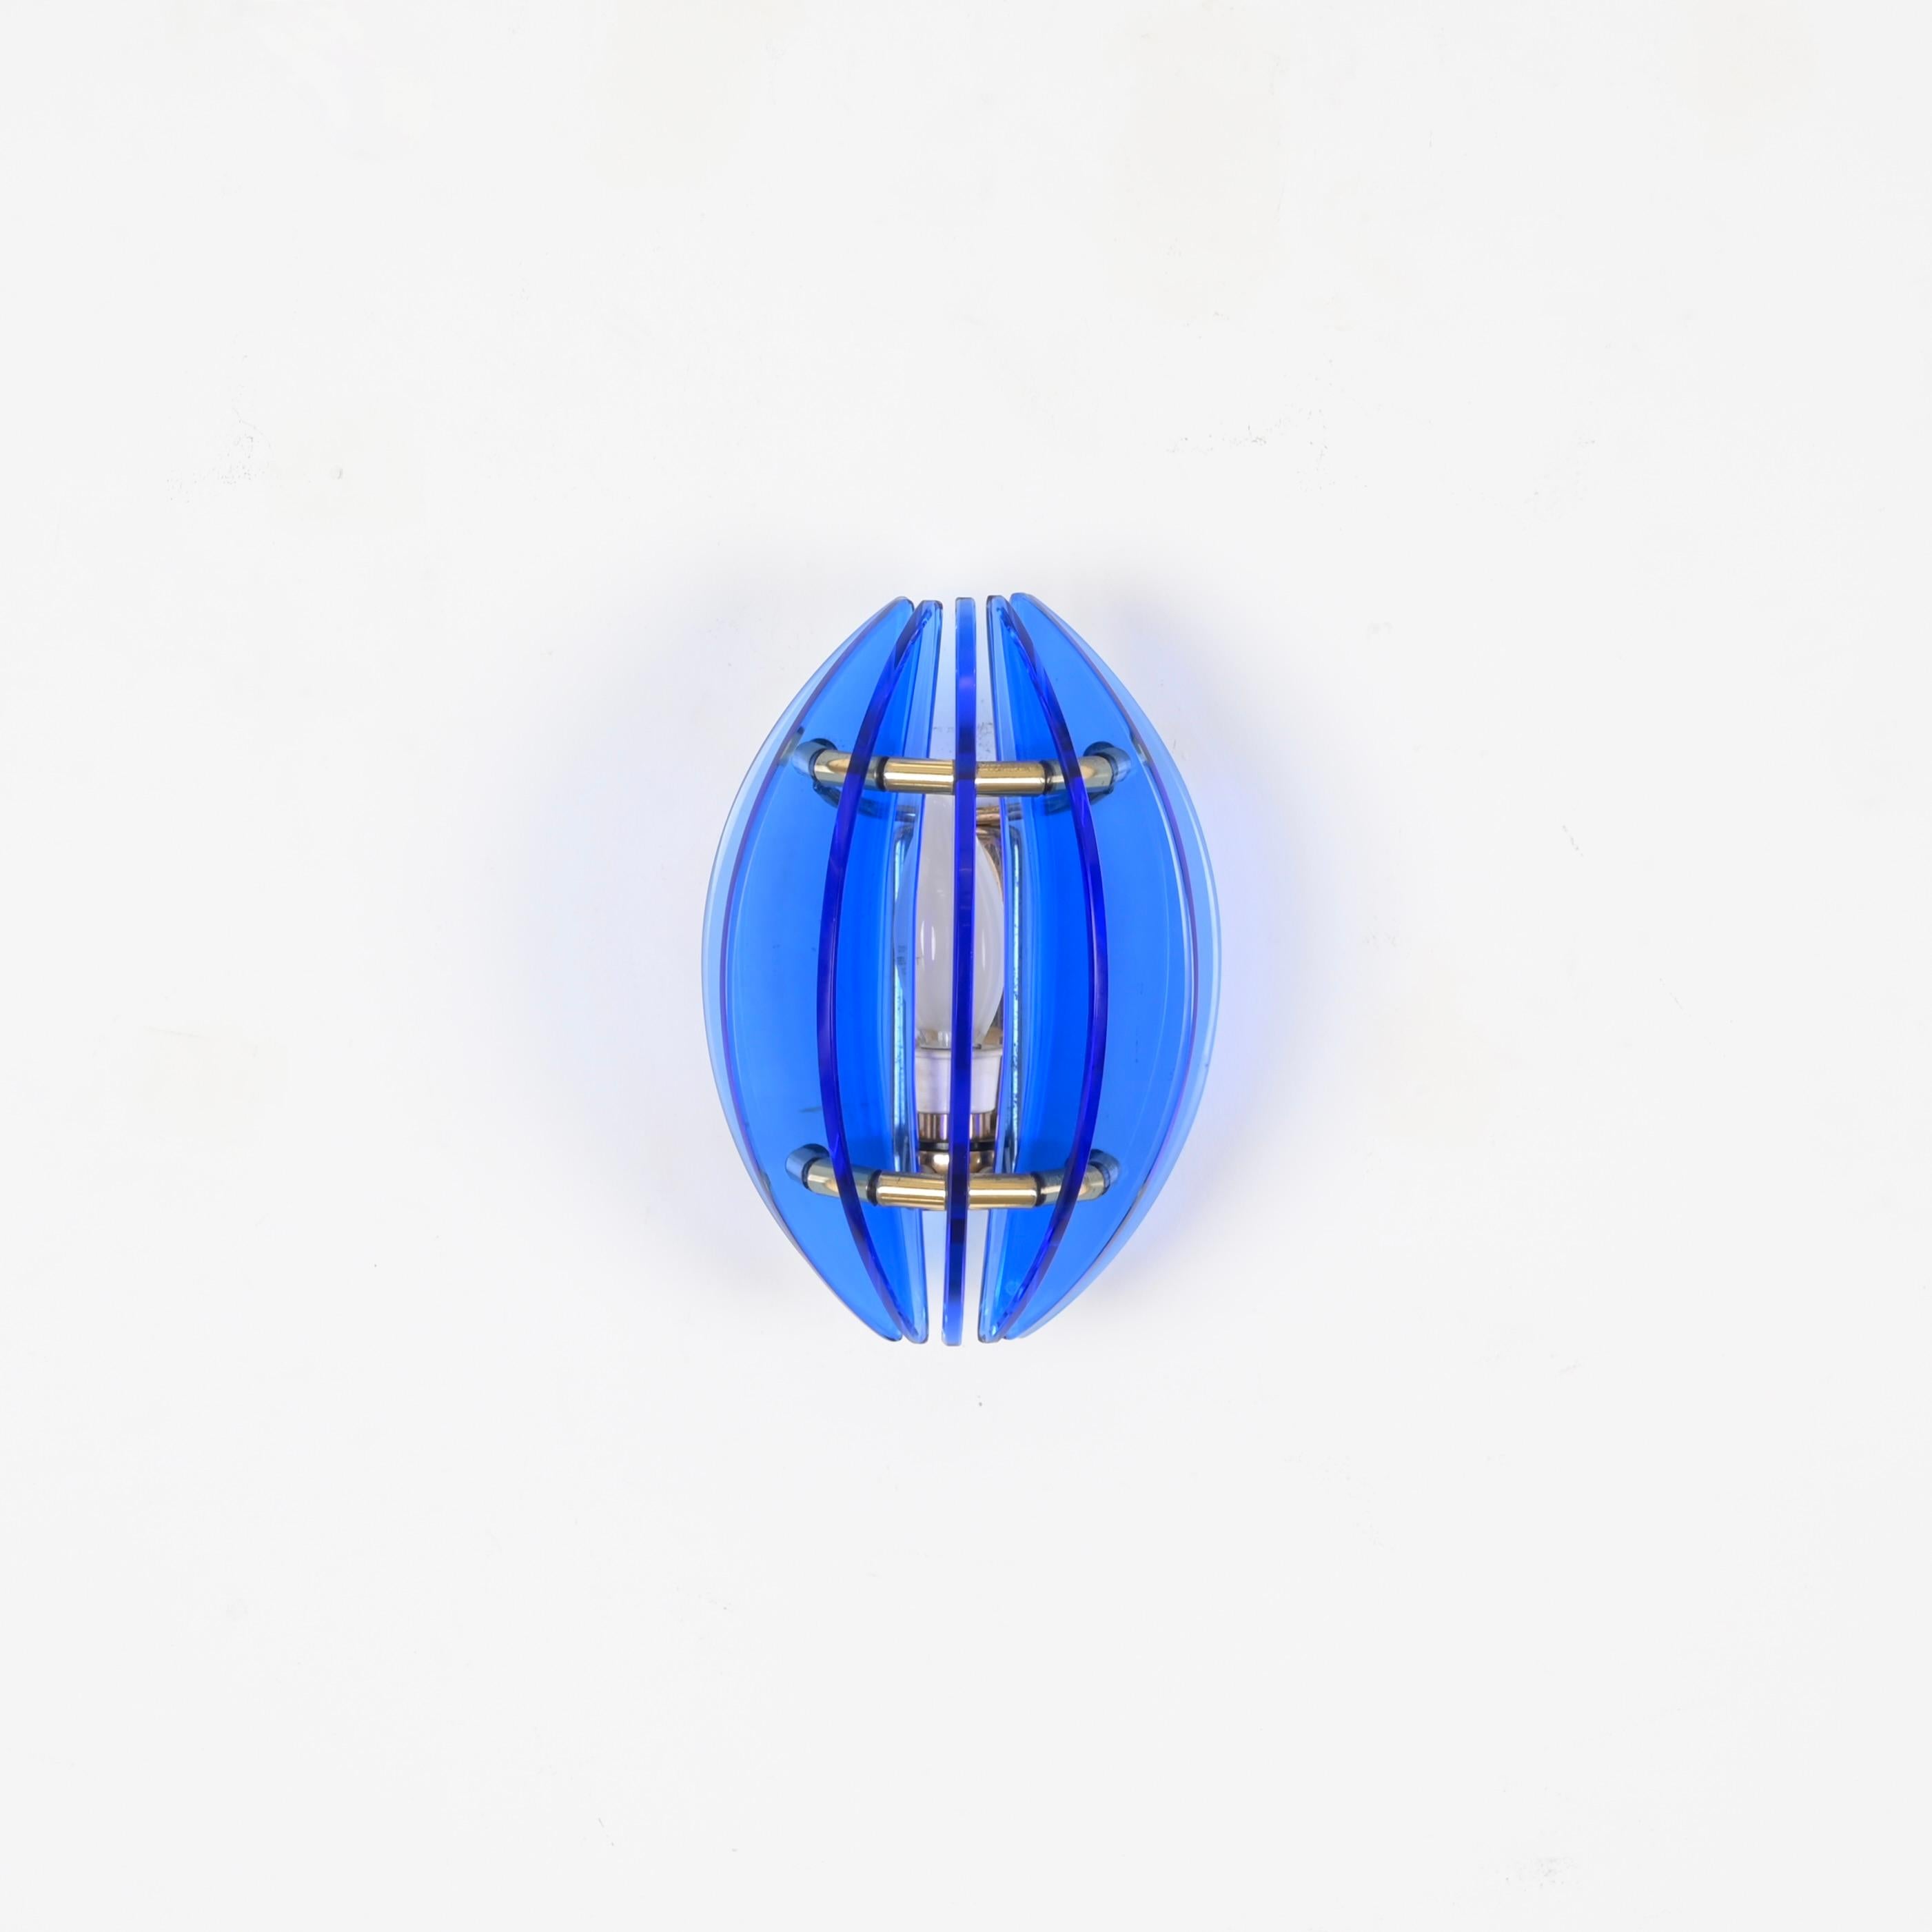 7 Wonderful Mid-Century wall sconce in a vibrant blue Murano glass and solid brass. This gorgeous piece was designed by Galvorame in Italy during the 1970s. 

This elegant wall light features a sinuous shade which consists of 7 crescent-shaped blue